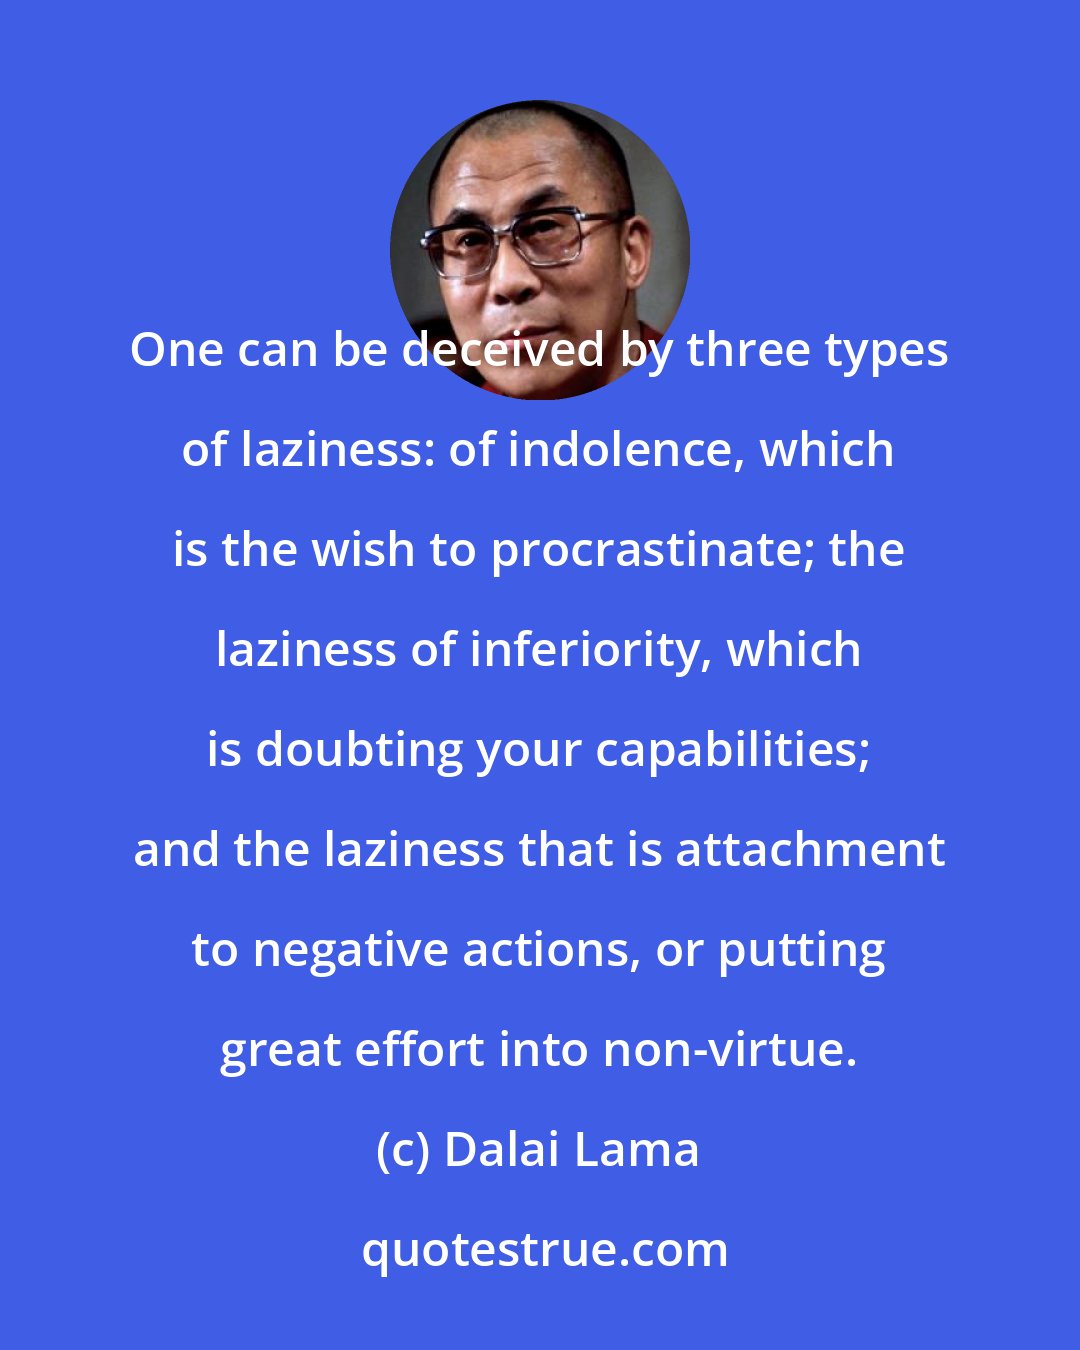 Dalai Lama: One can be deceived by three types of laziness: of indolence, which is the wish to procrastinate; the laziness of inferiority, which is doubting your capabilities; and the laziness that is attachment to negative actions, or putting great effort into non-virtue.